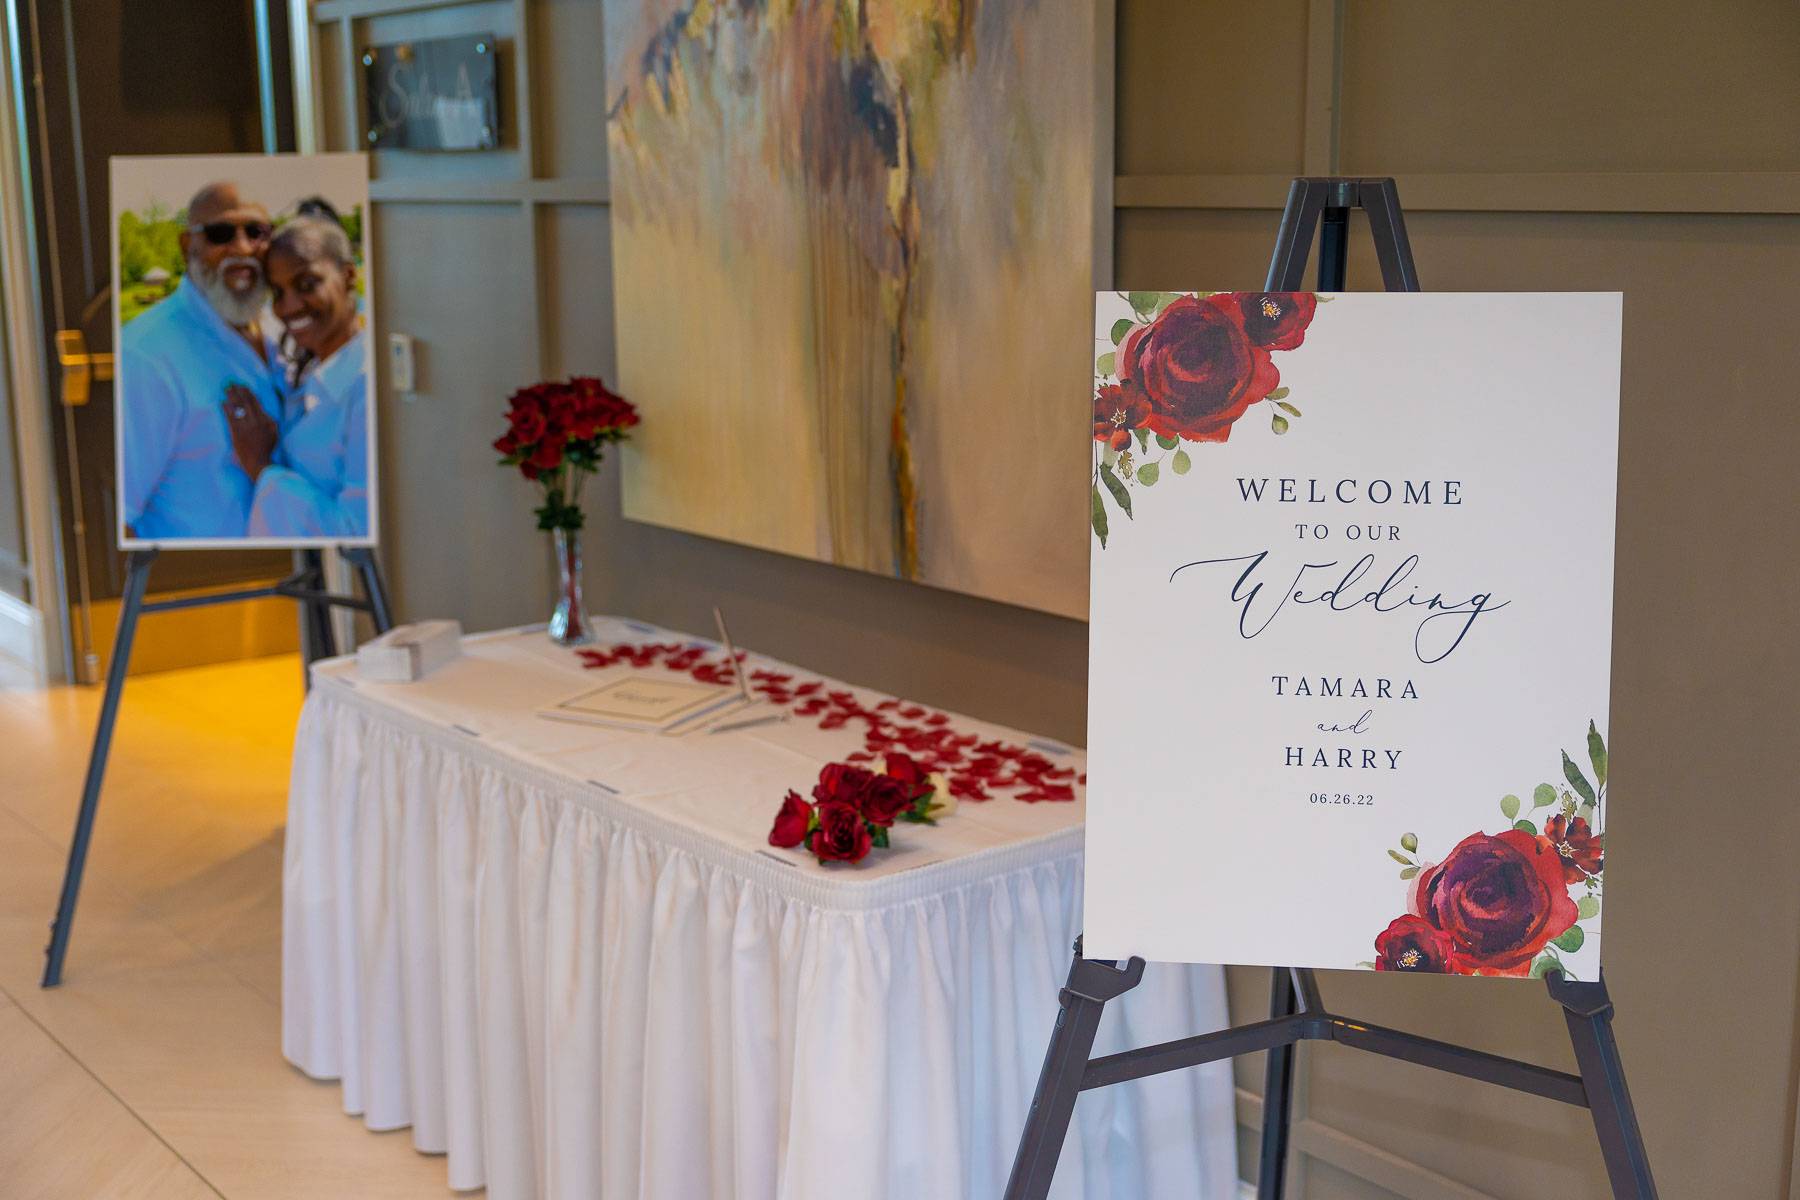 A wedding welcome sign